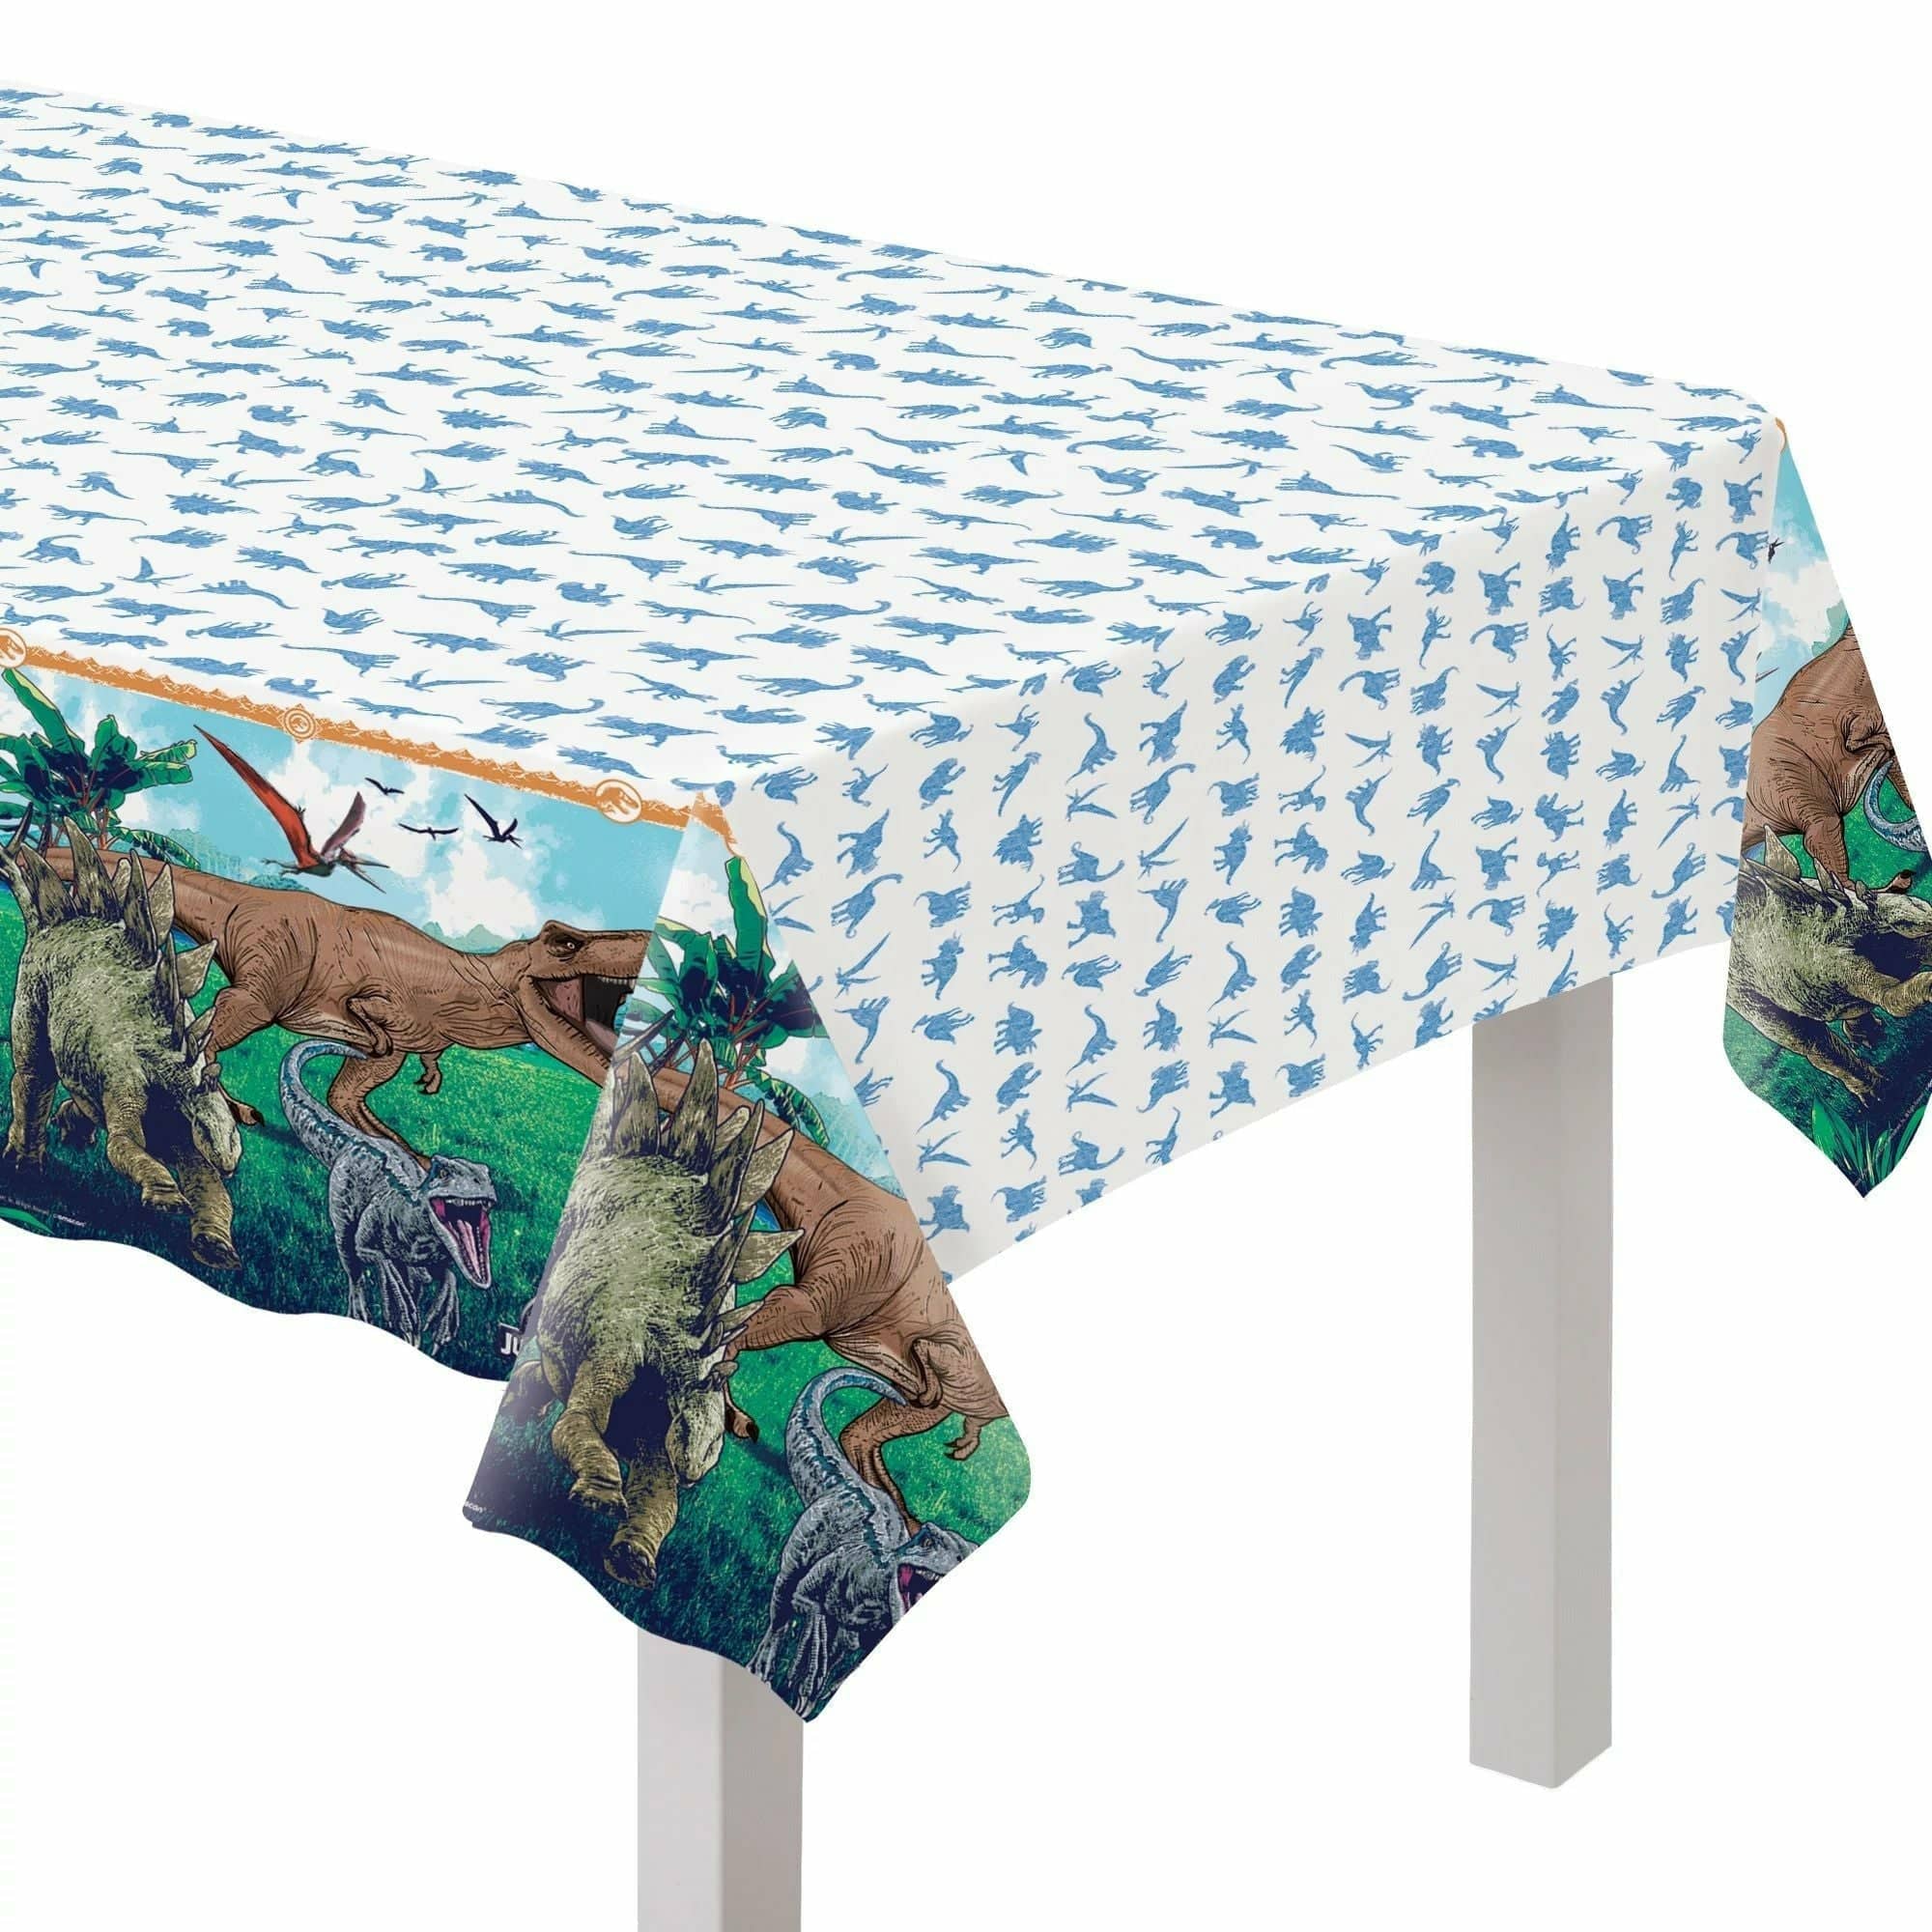 Amscan BIRTHDAY: JUVENILE Jurassic World Into the Wild Plastic Table Cover